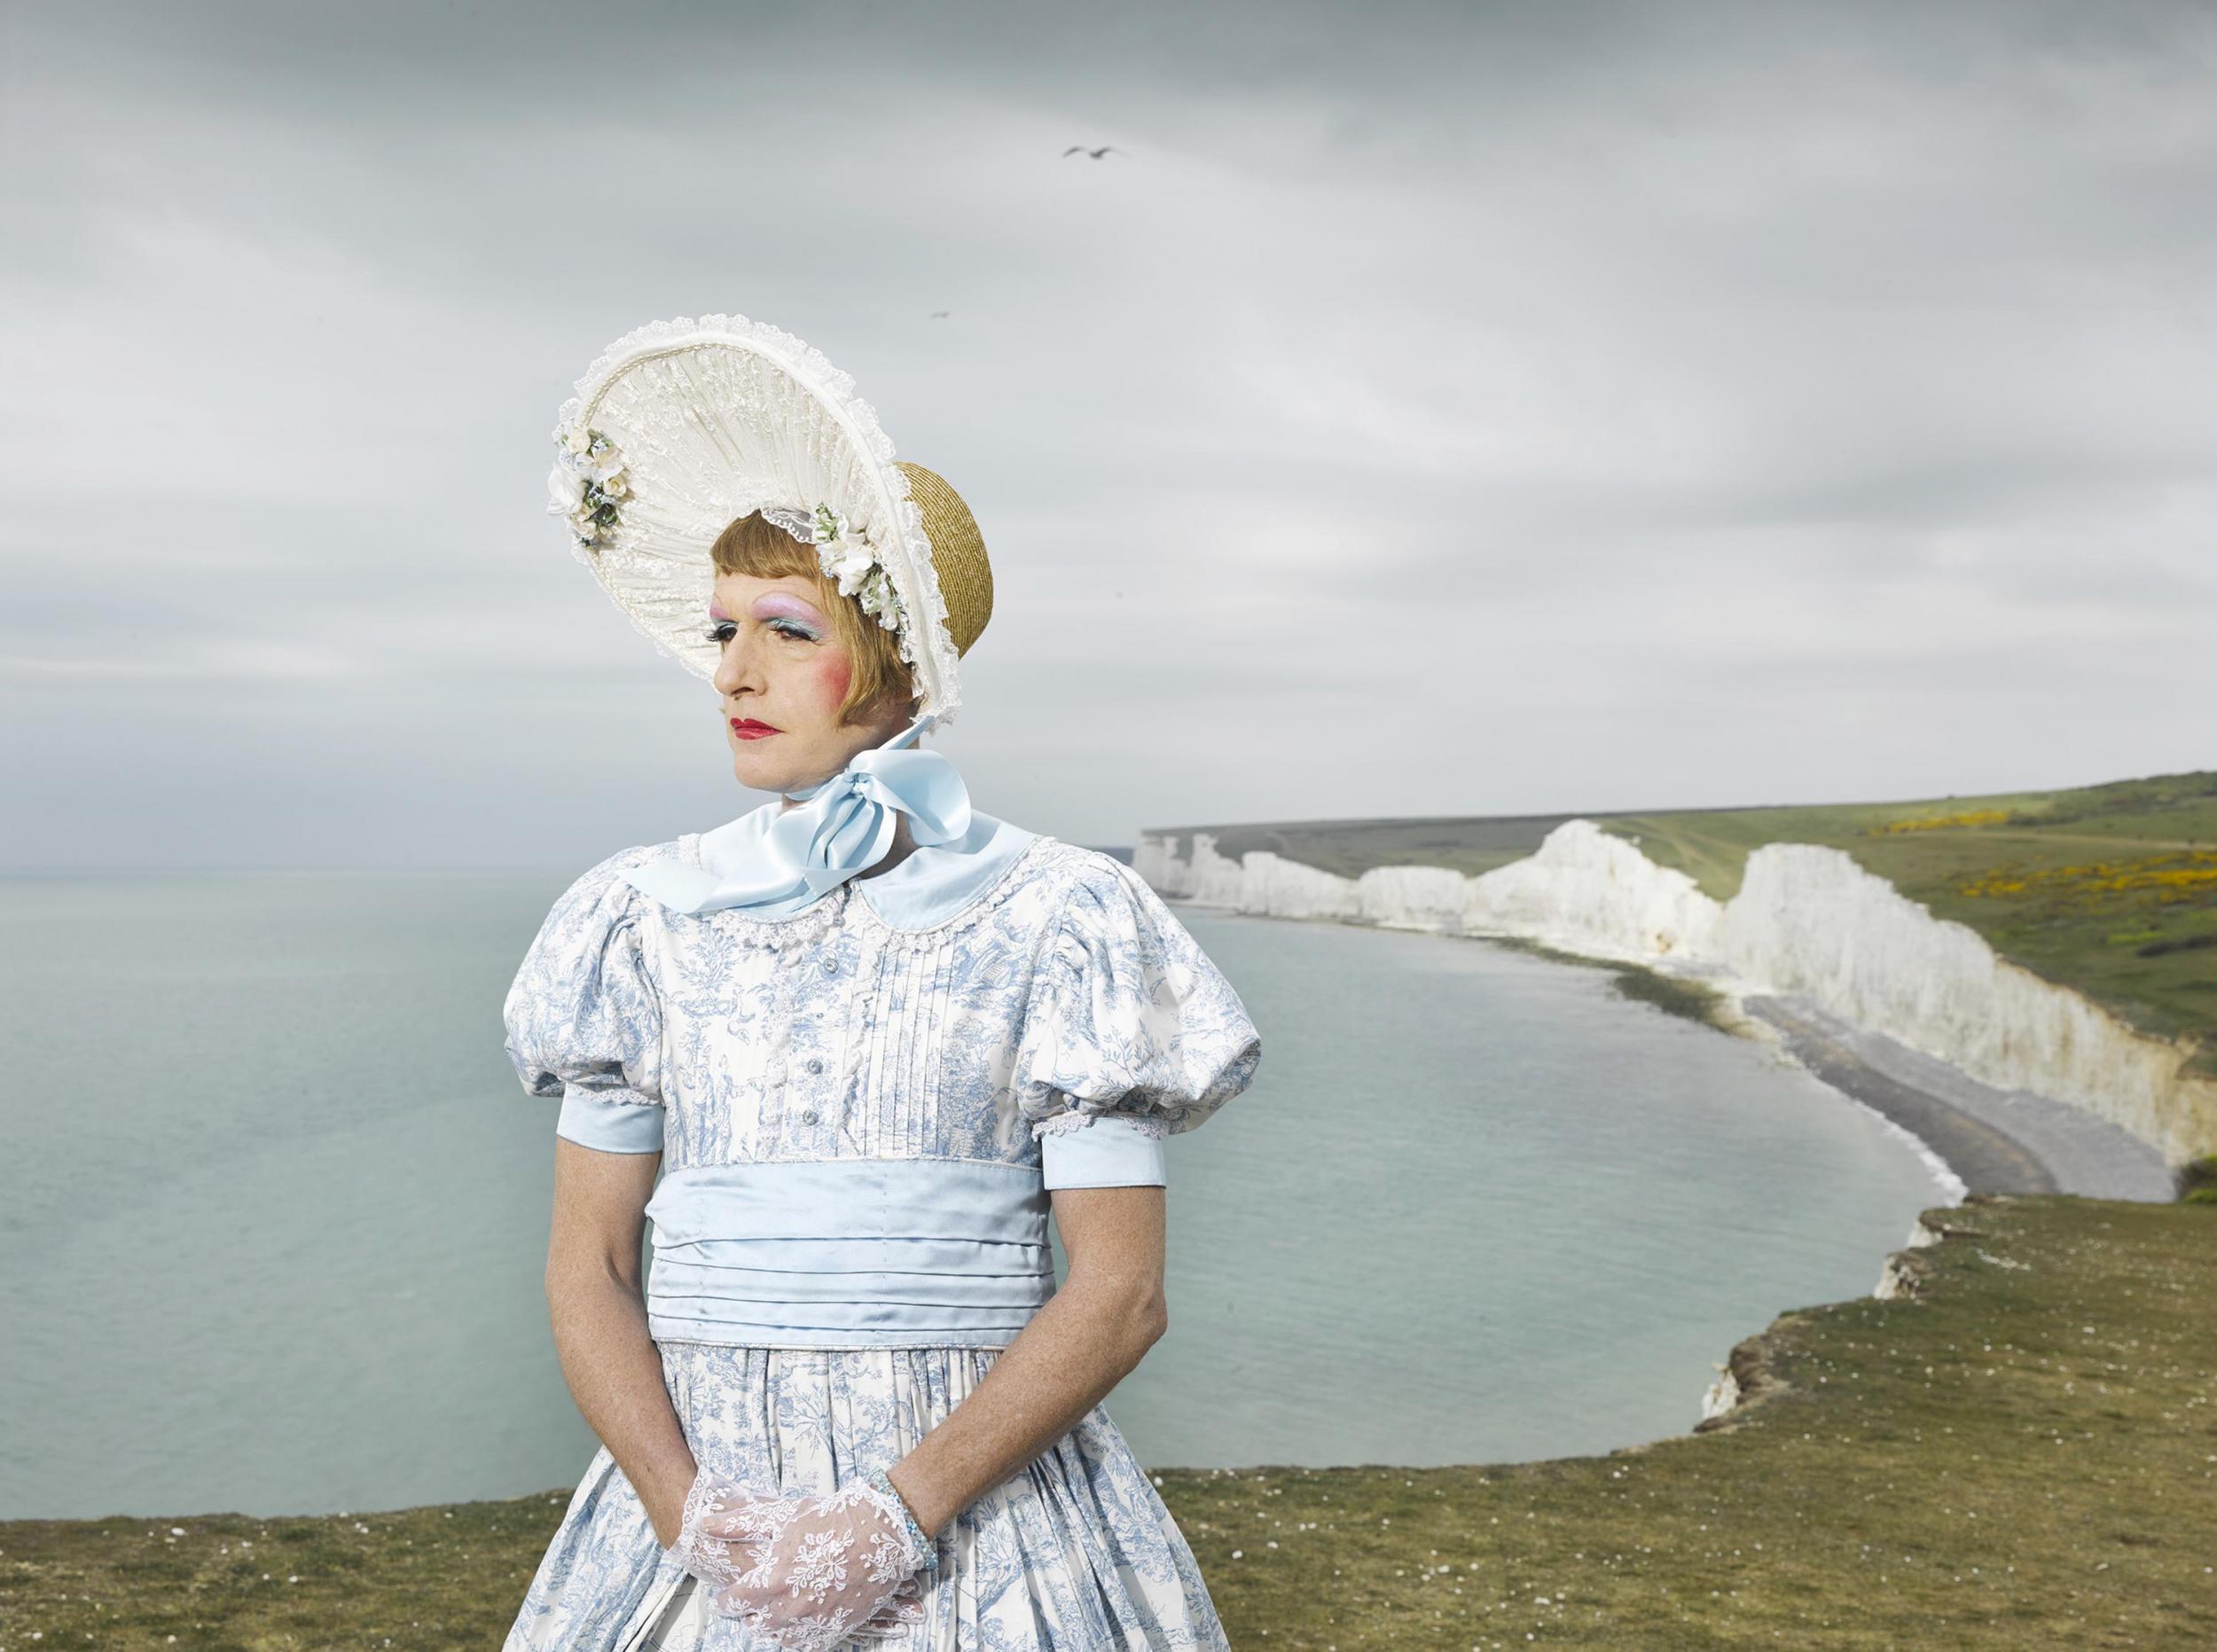 Grayson Perry standing on the White Cliffs of Dover in a Bo Peep outfit makes you proud to be British